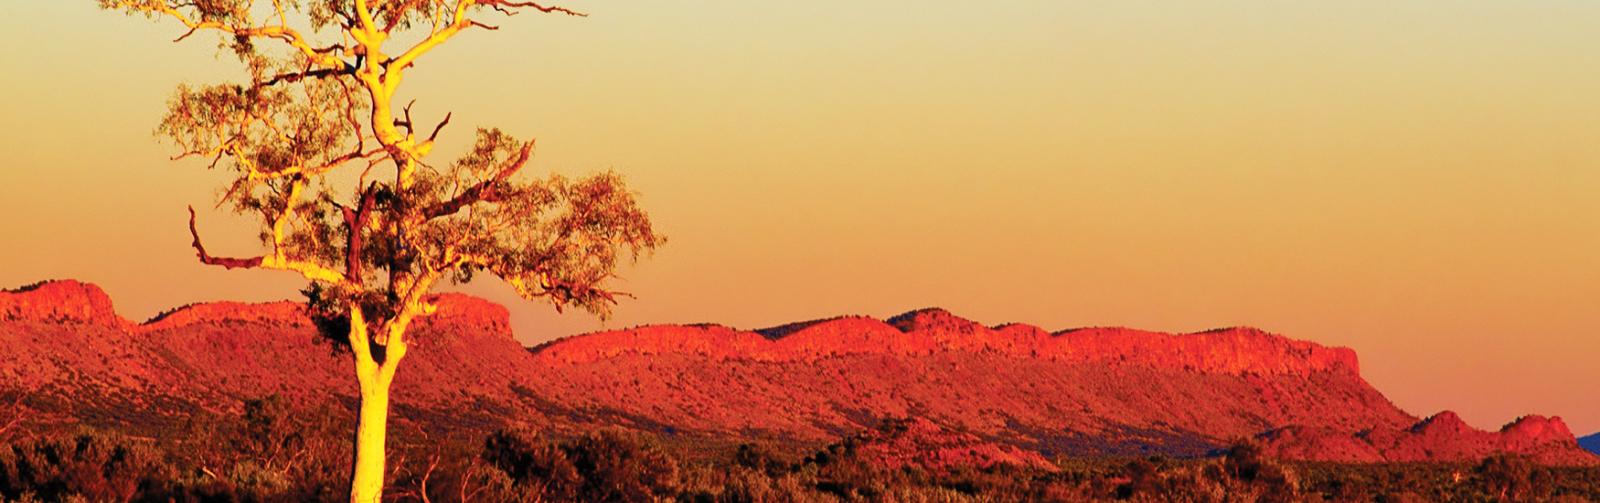 13 Day Alice Springs to Darwin Road Trip Itinerary